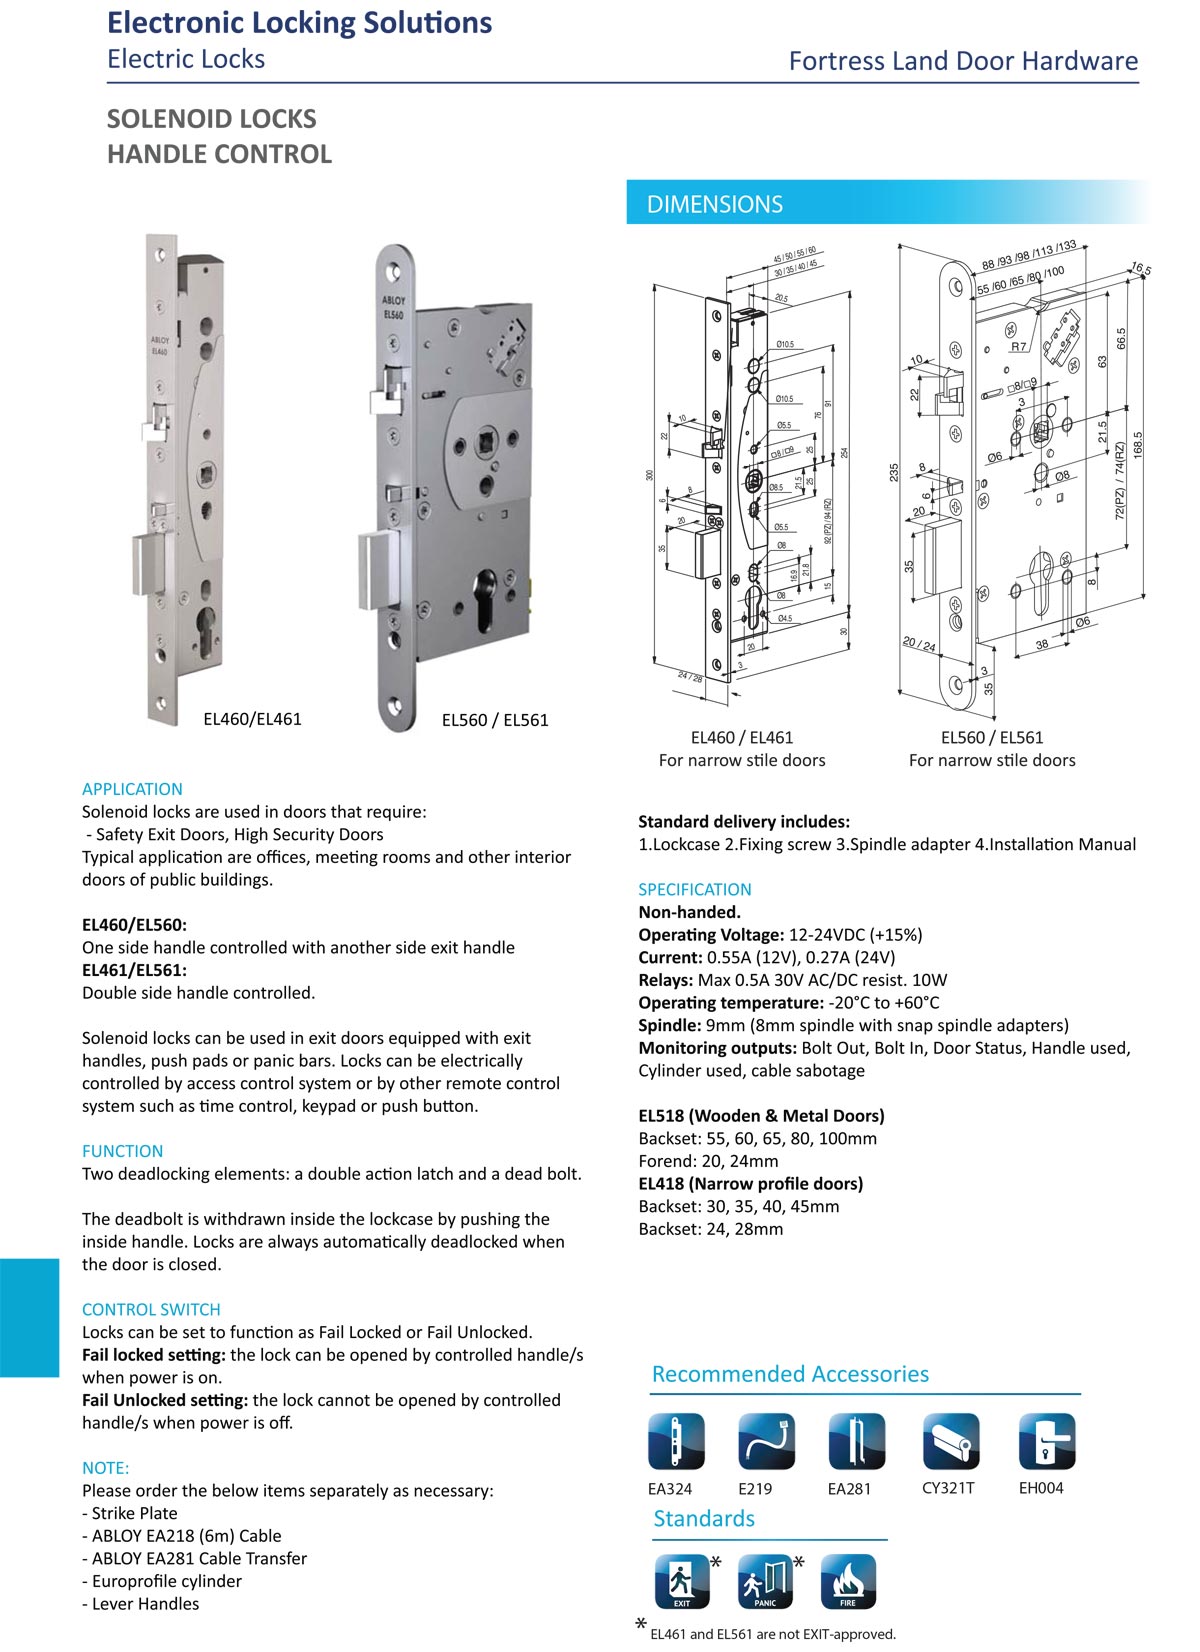 abloy electric lock, abloy el560, abloy electric lock, electronic controlled lock, emergency exit door lock, high security access control lock, double swing doorlock, electric strike, fire rated electric lock, Fortress Land Security Company Yangon, Myanmar